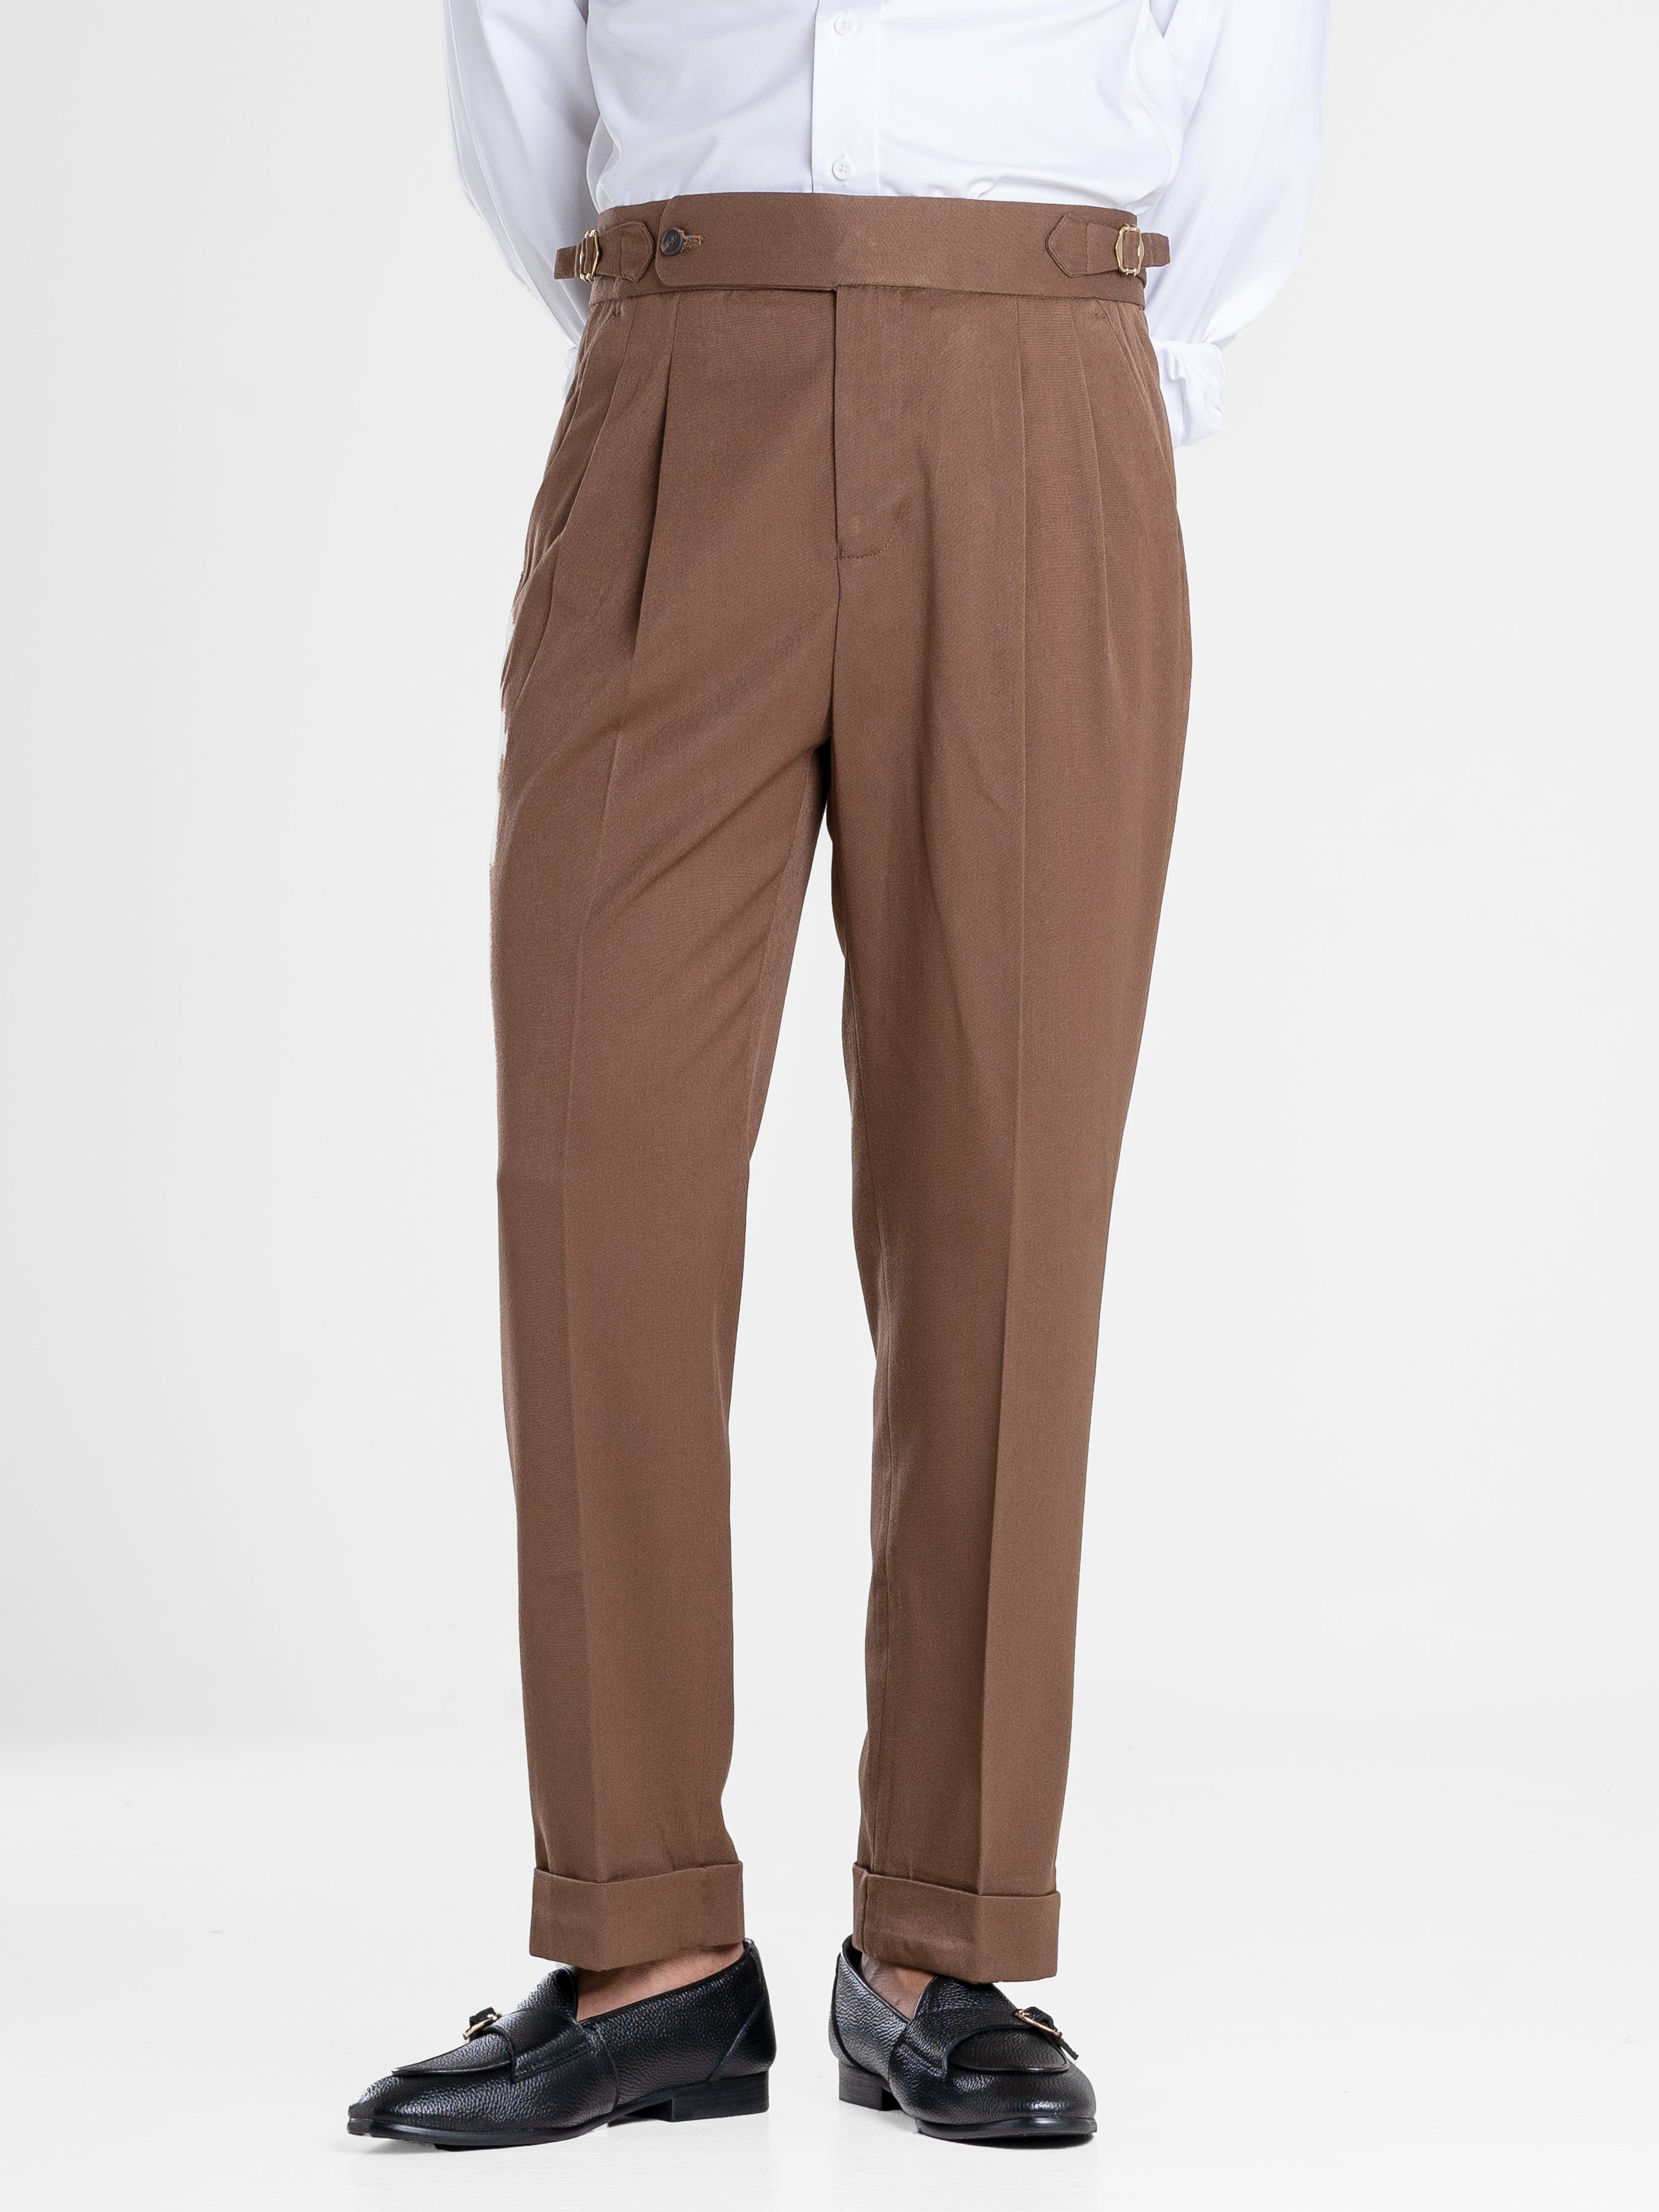 Trousers With Side Adjusters - Brown Plain Cuffed (Stretchable)